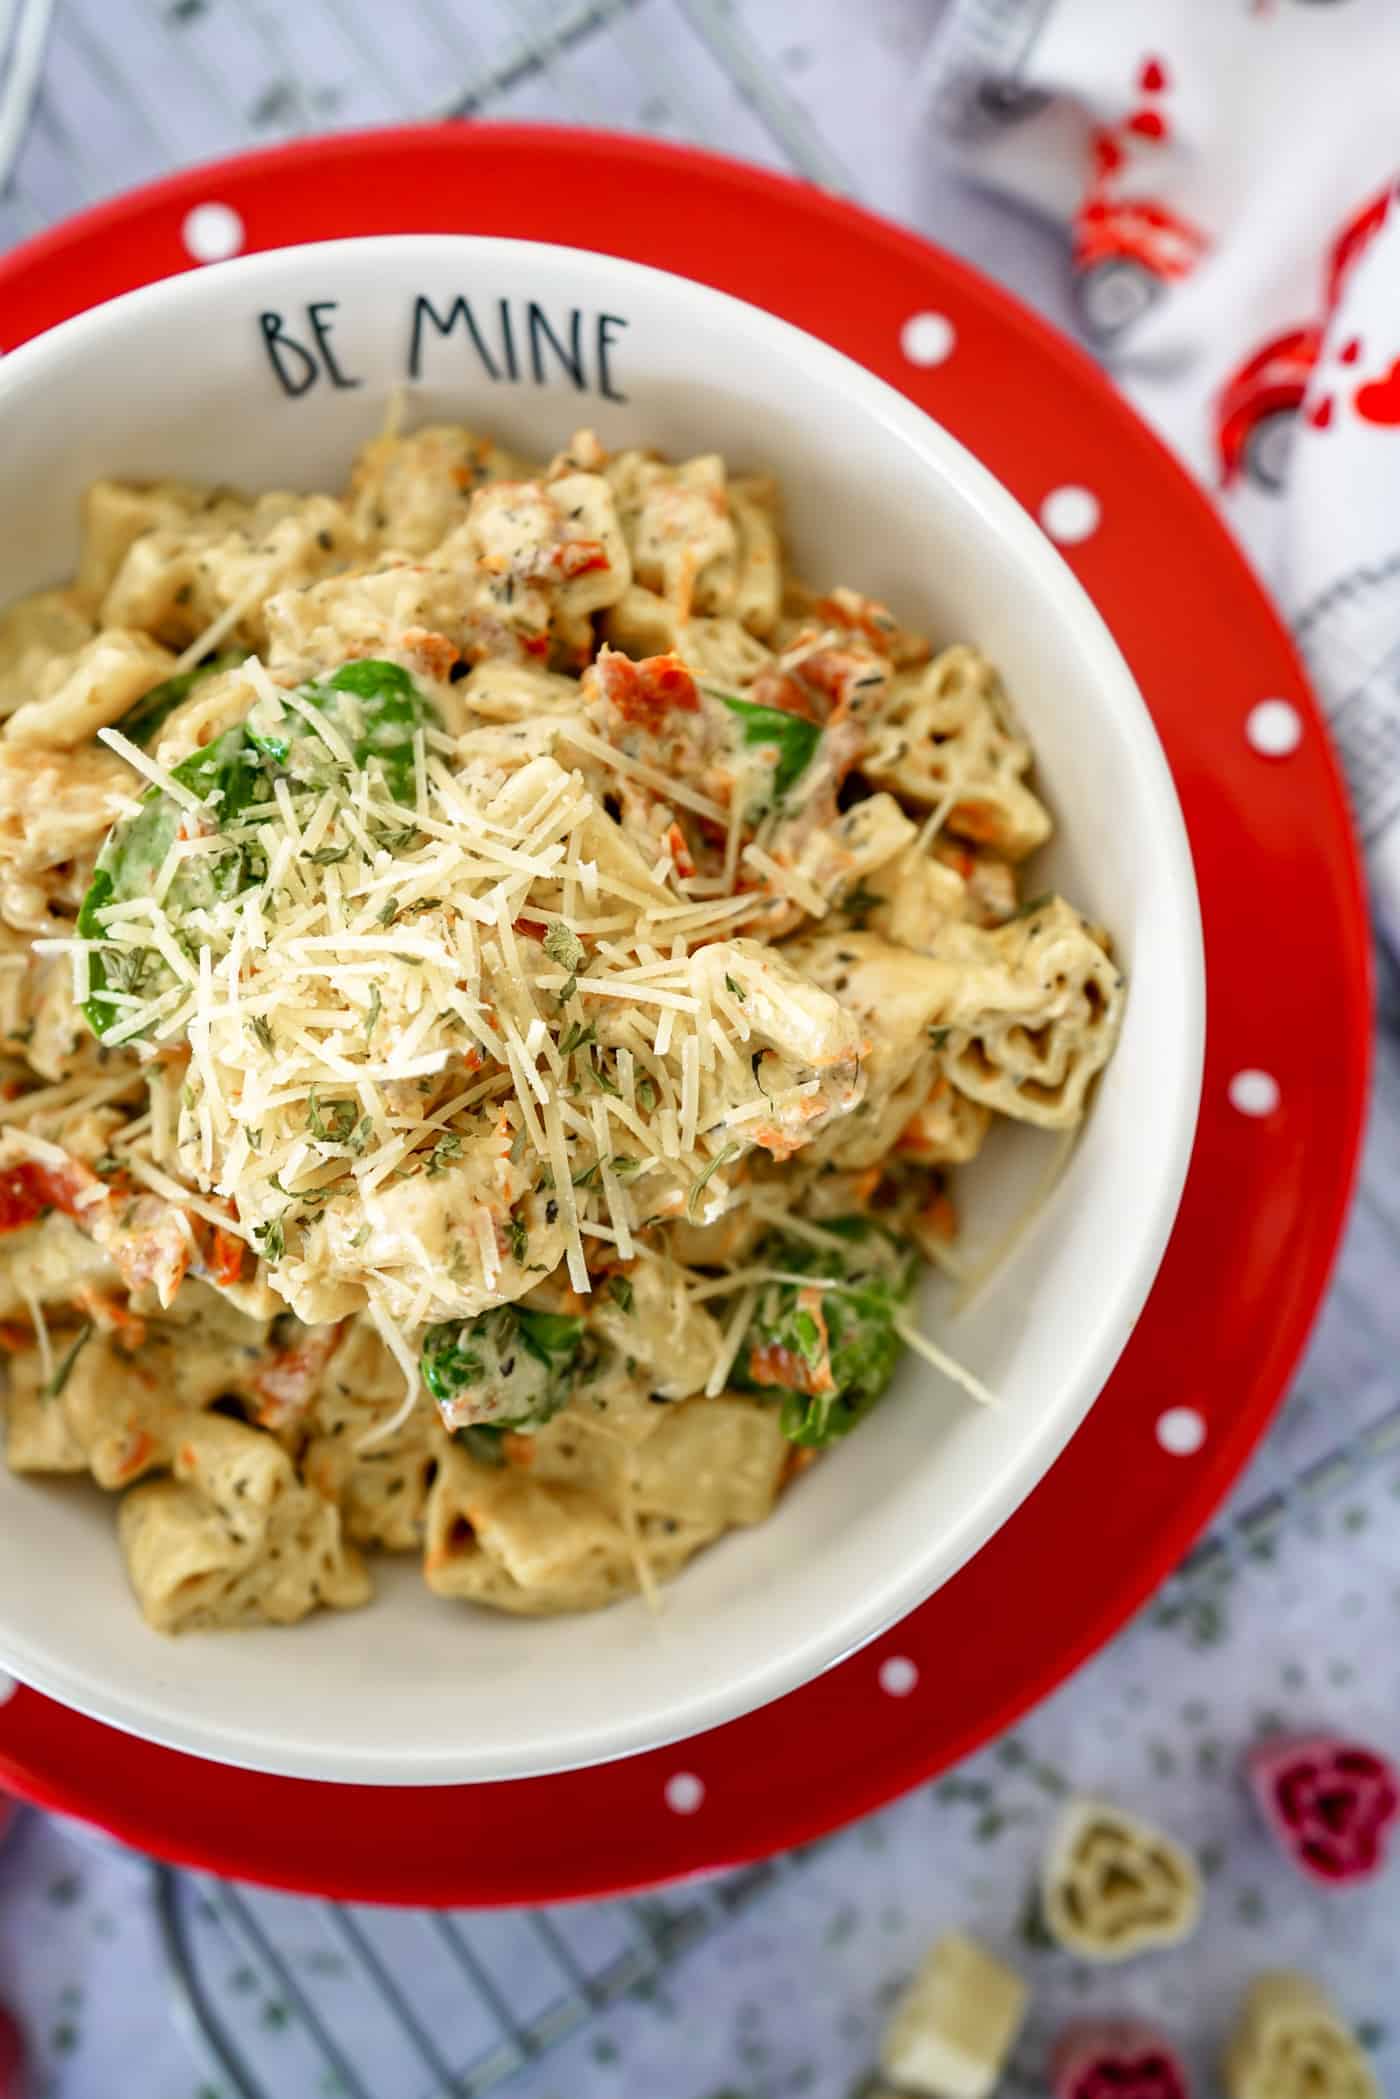 Instant Pot Tuscan Pasta is very easy to make, creamy and delicious with perfect sun dried tomatoes and spinach. Made in less than 5 minutes!